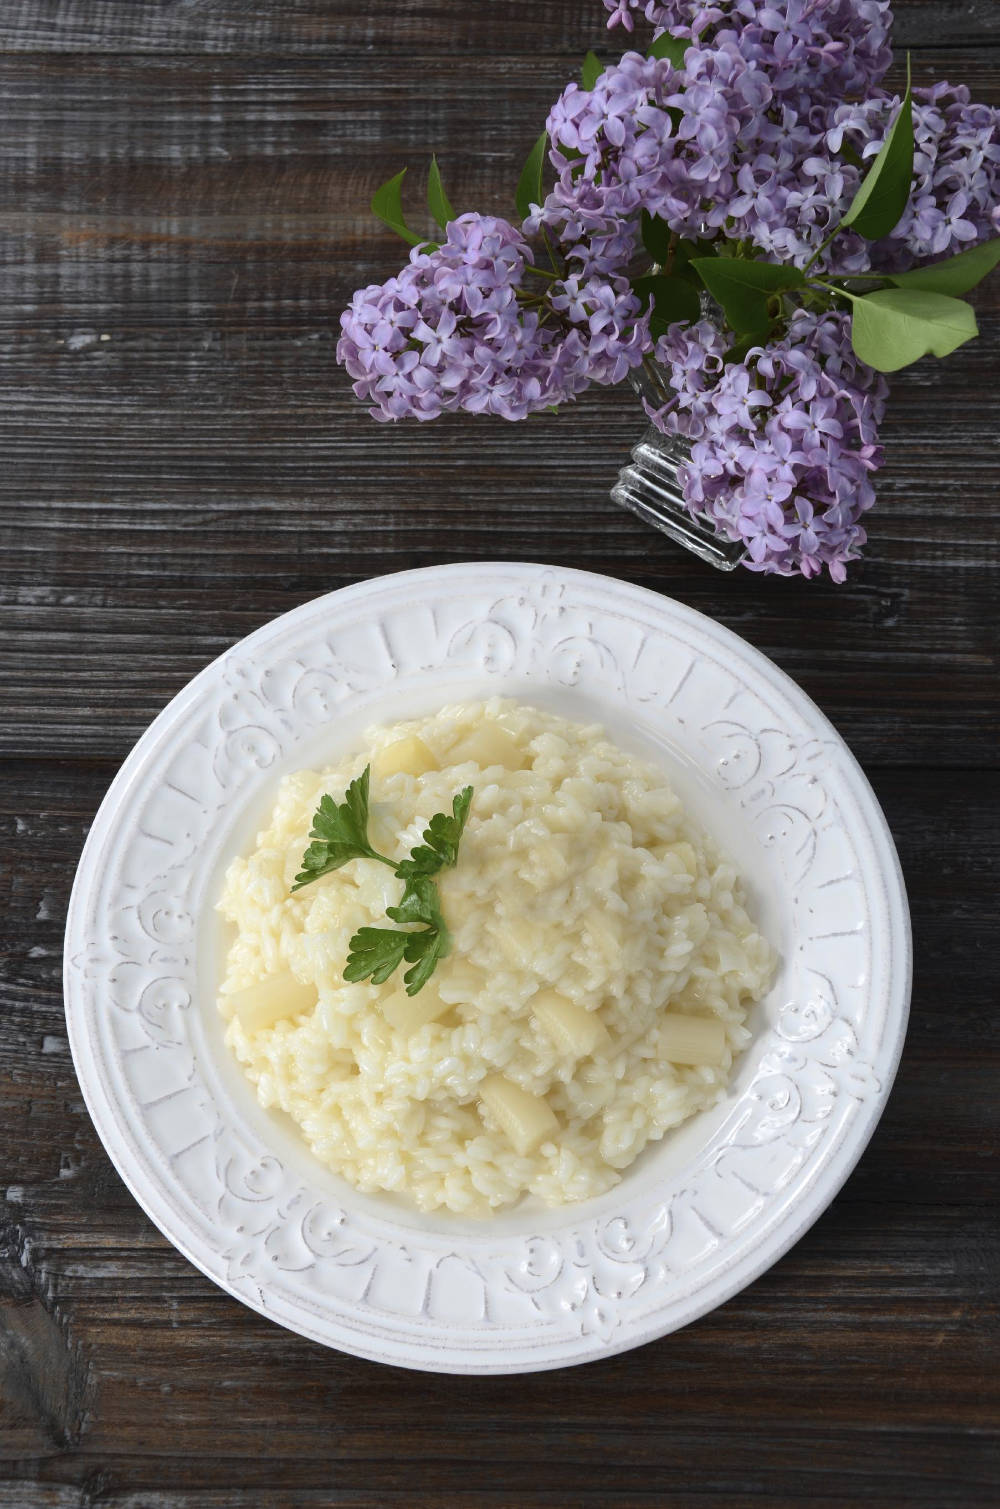 PETERSILIENWURZEL RISOTTO